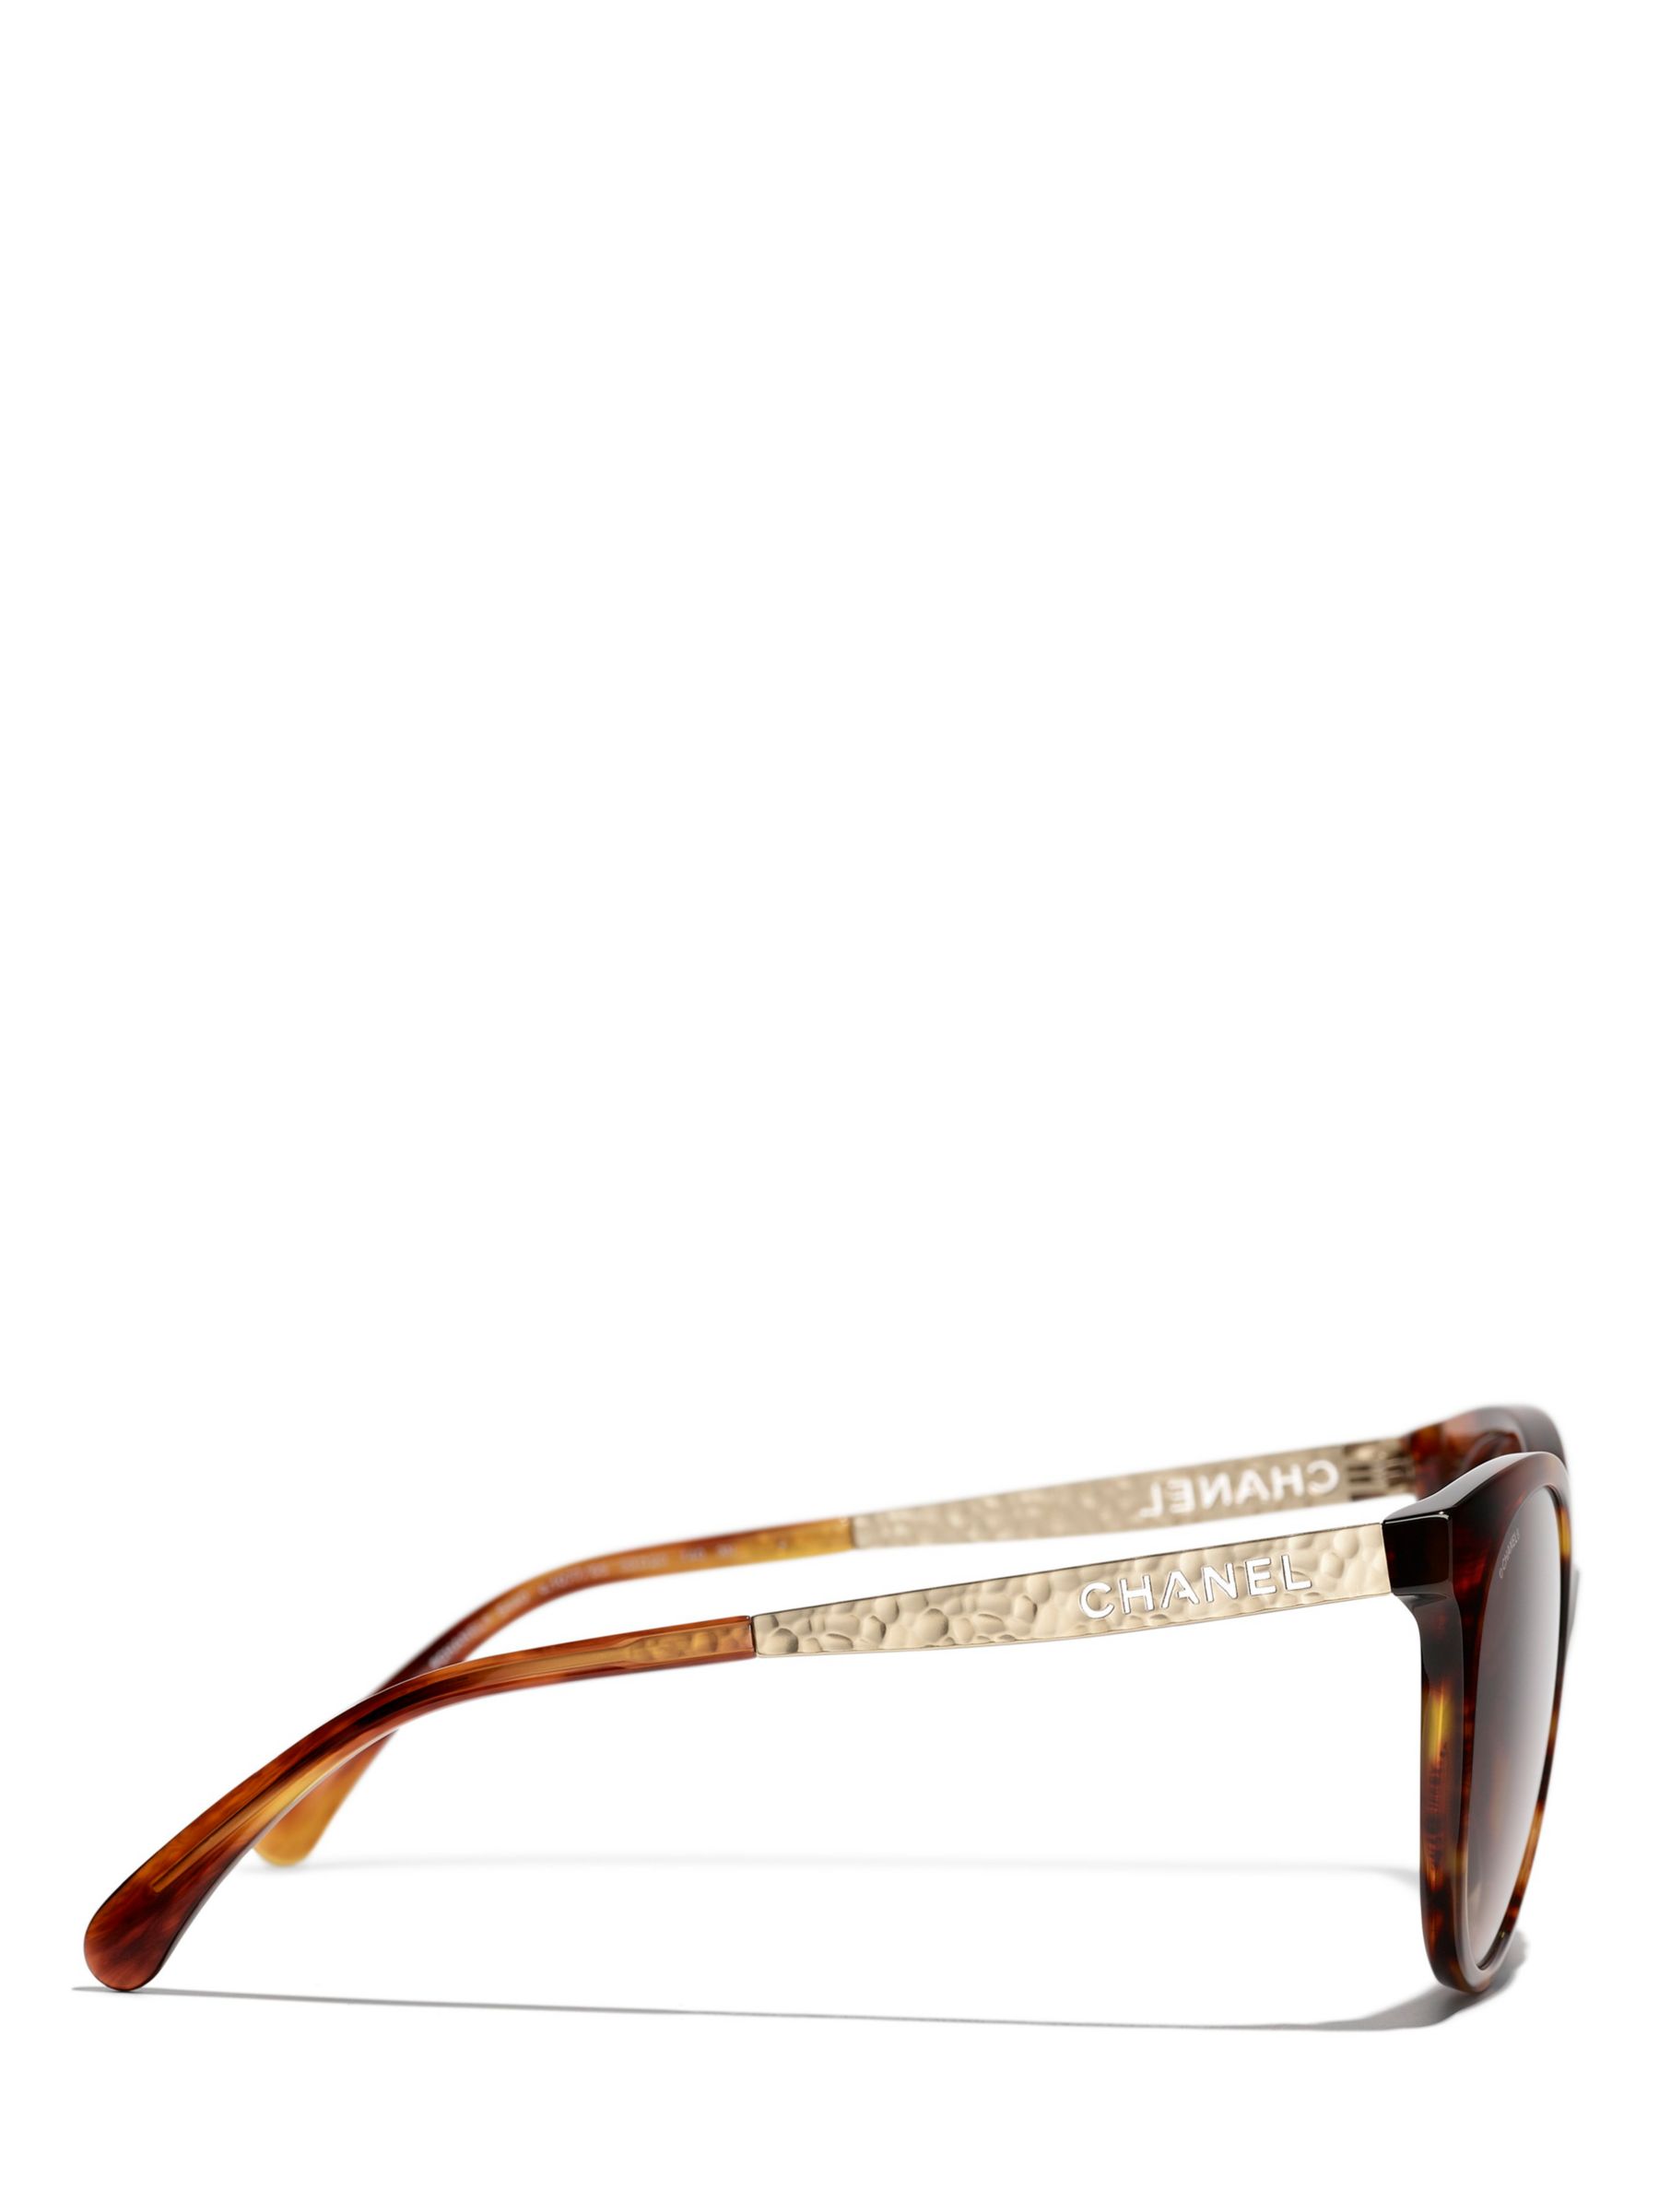 Buy CHANEL Oval Sunglasses CH5440 Striped Brown/Brown Gradient Online at johnlewis.com